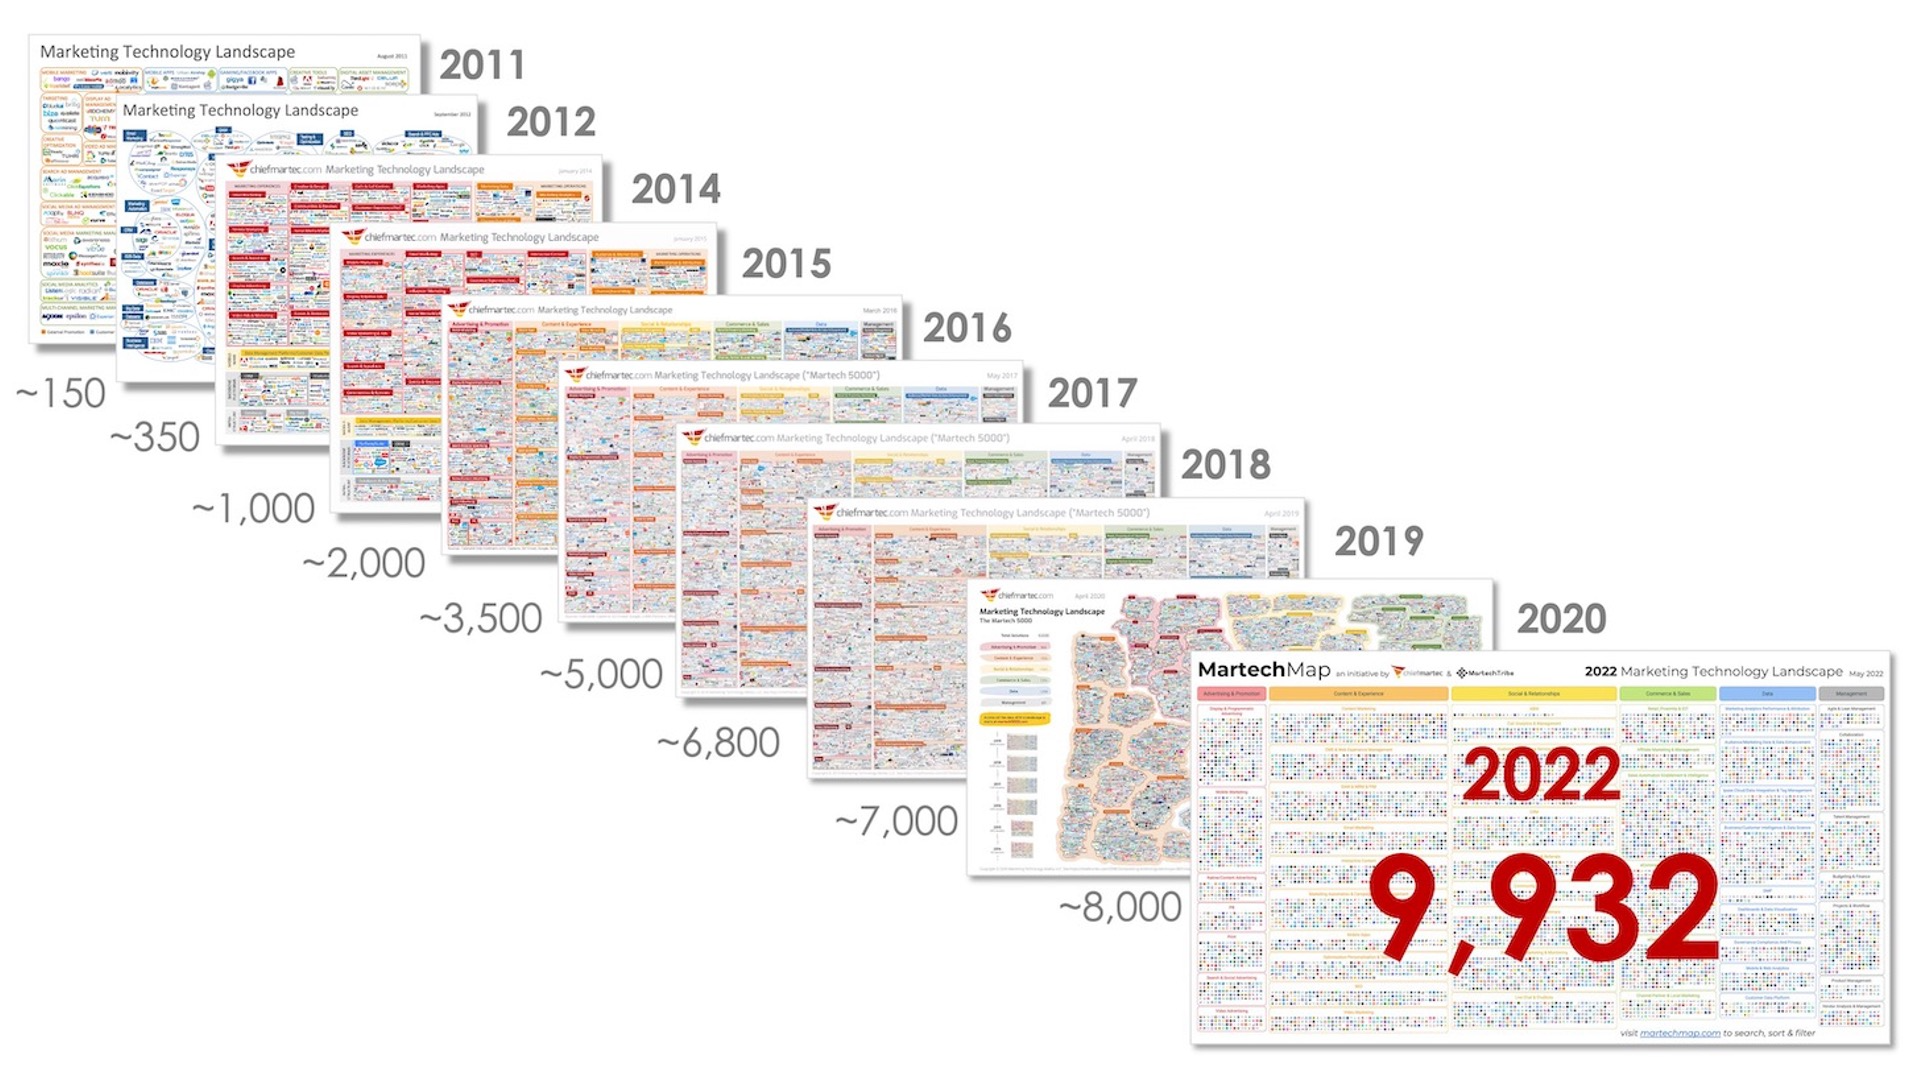 Marketing Technology Solutions over the years